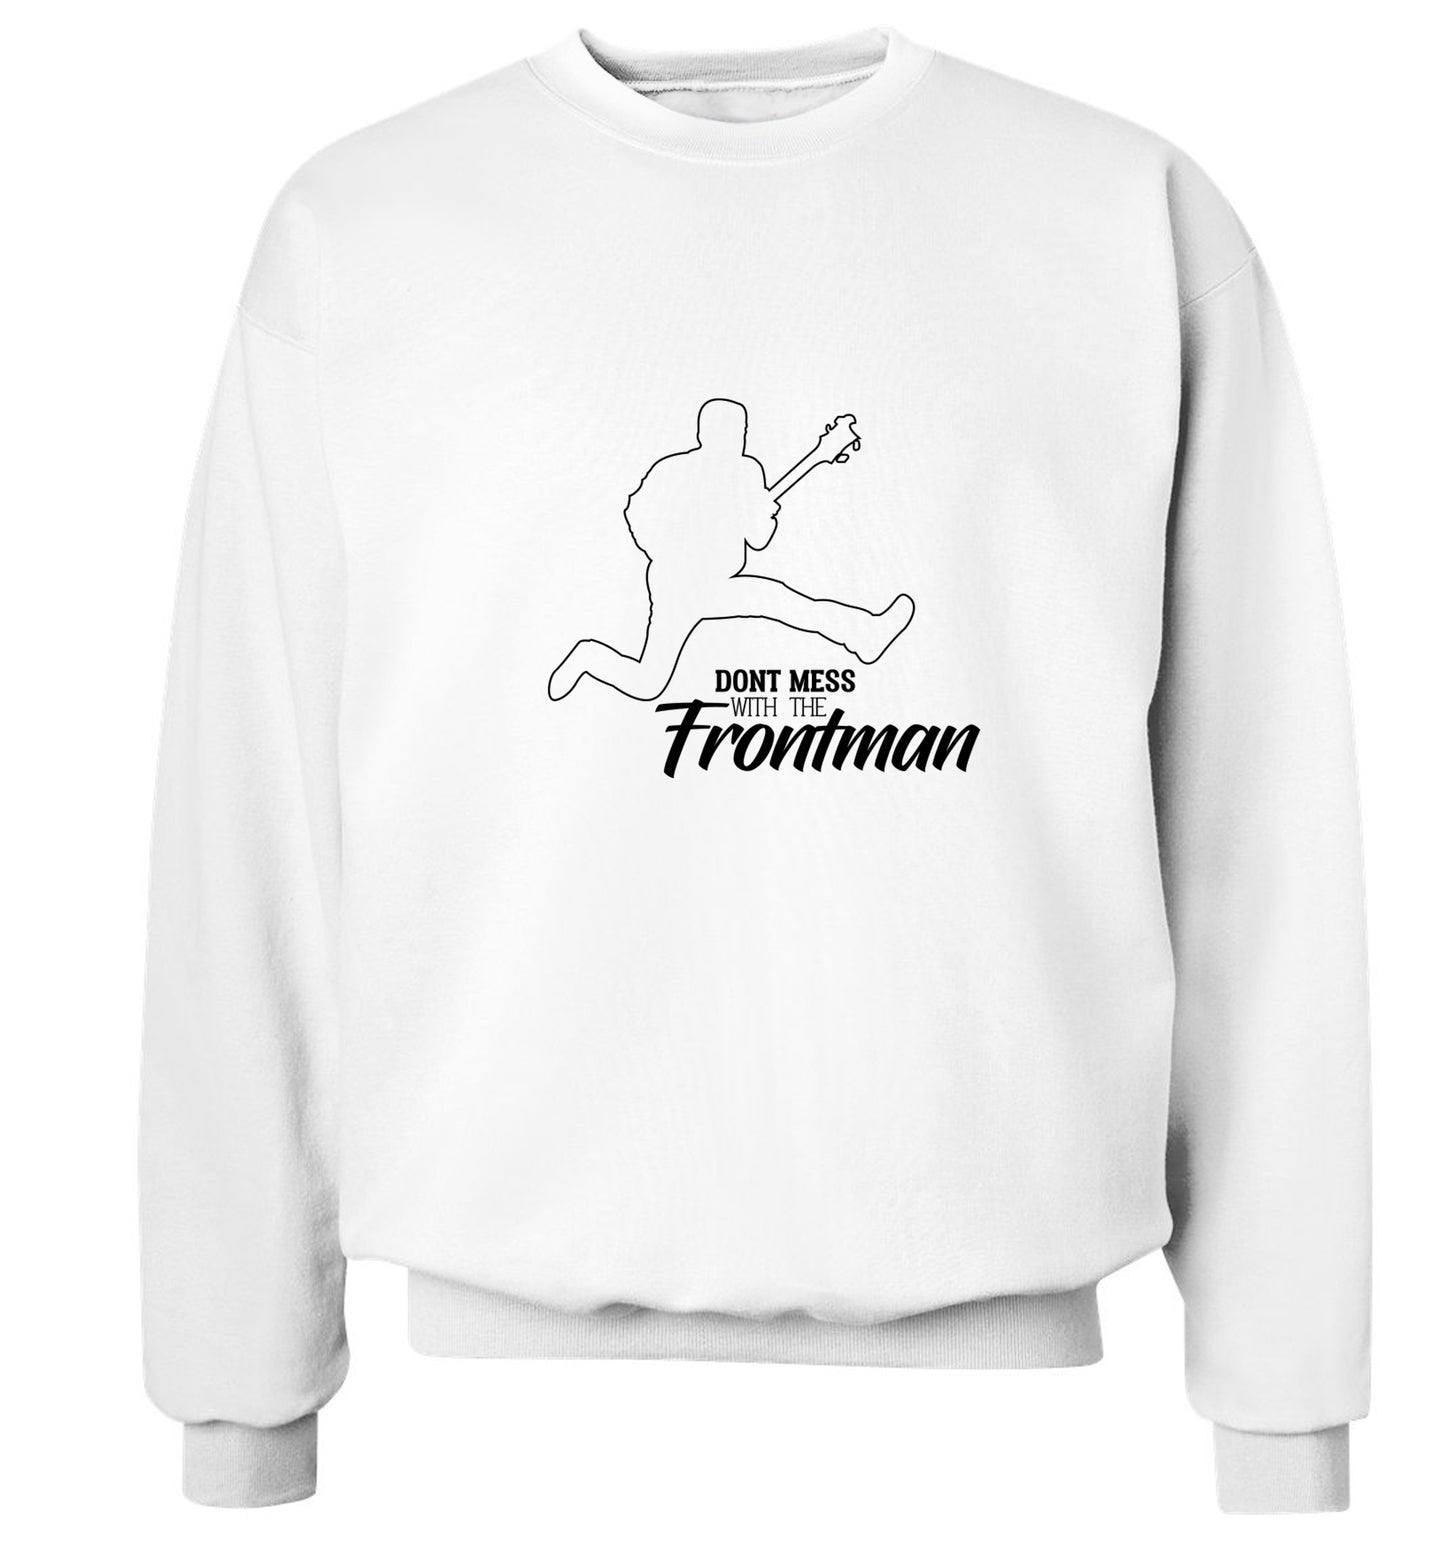 Don't mess with the frontman Adult's unisex white Sweater 2XL